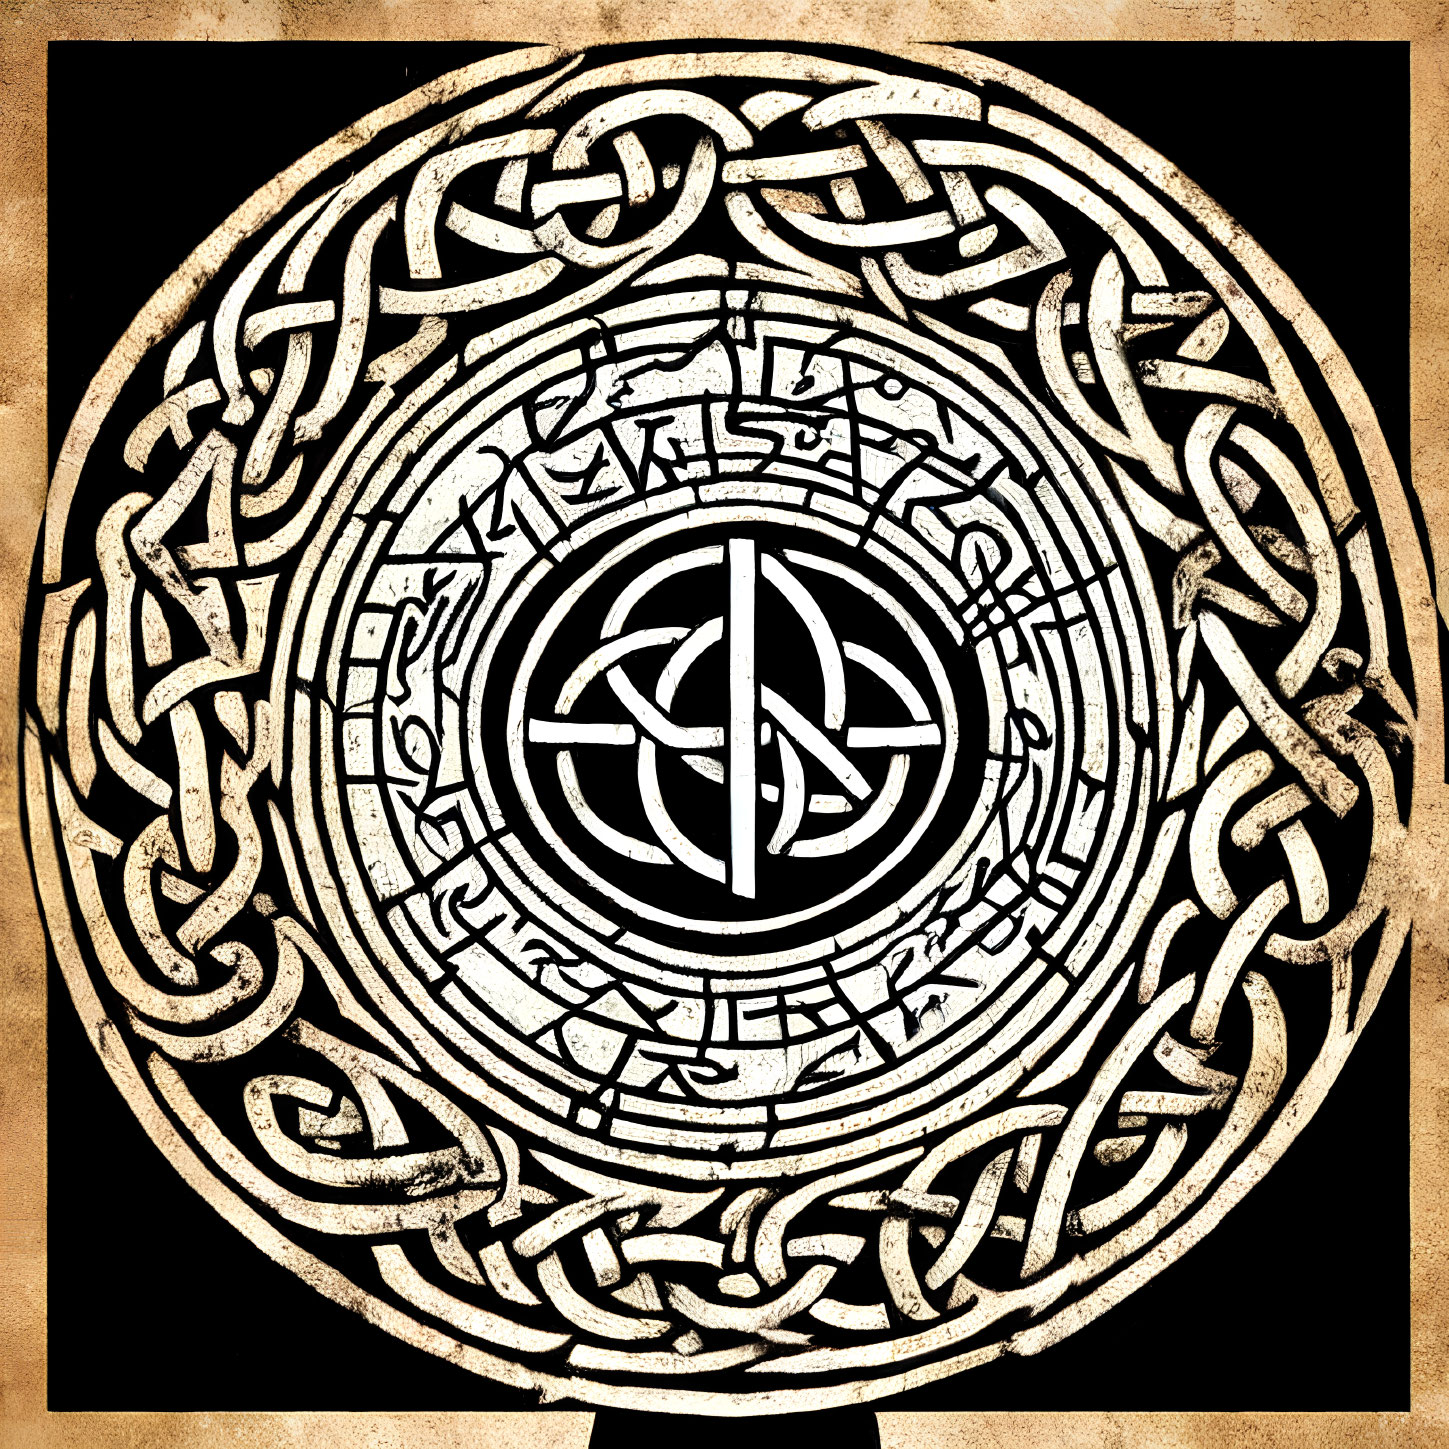 Intricate Celtic knot design with runes on parchment background